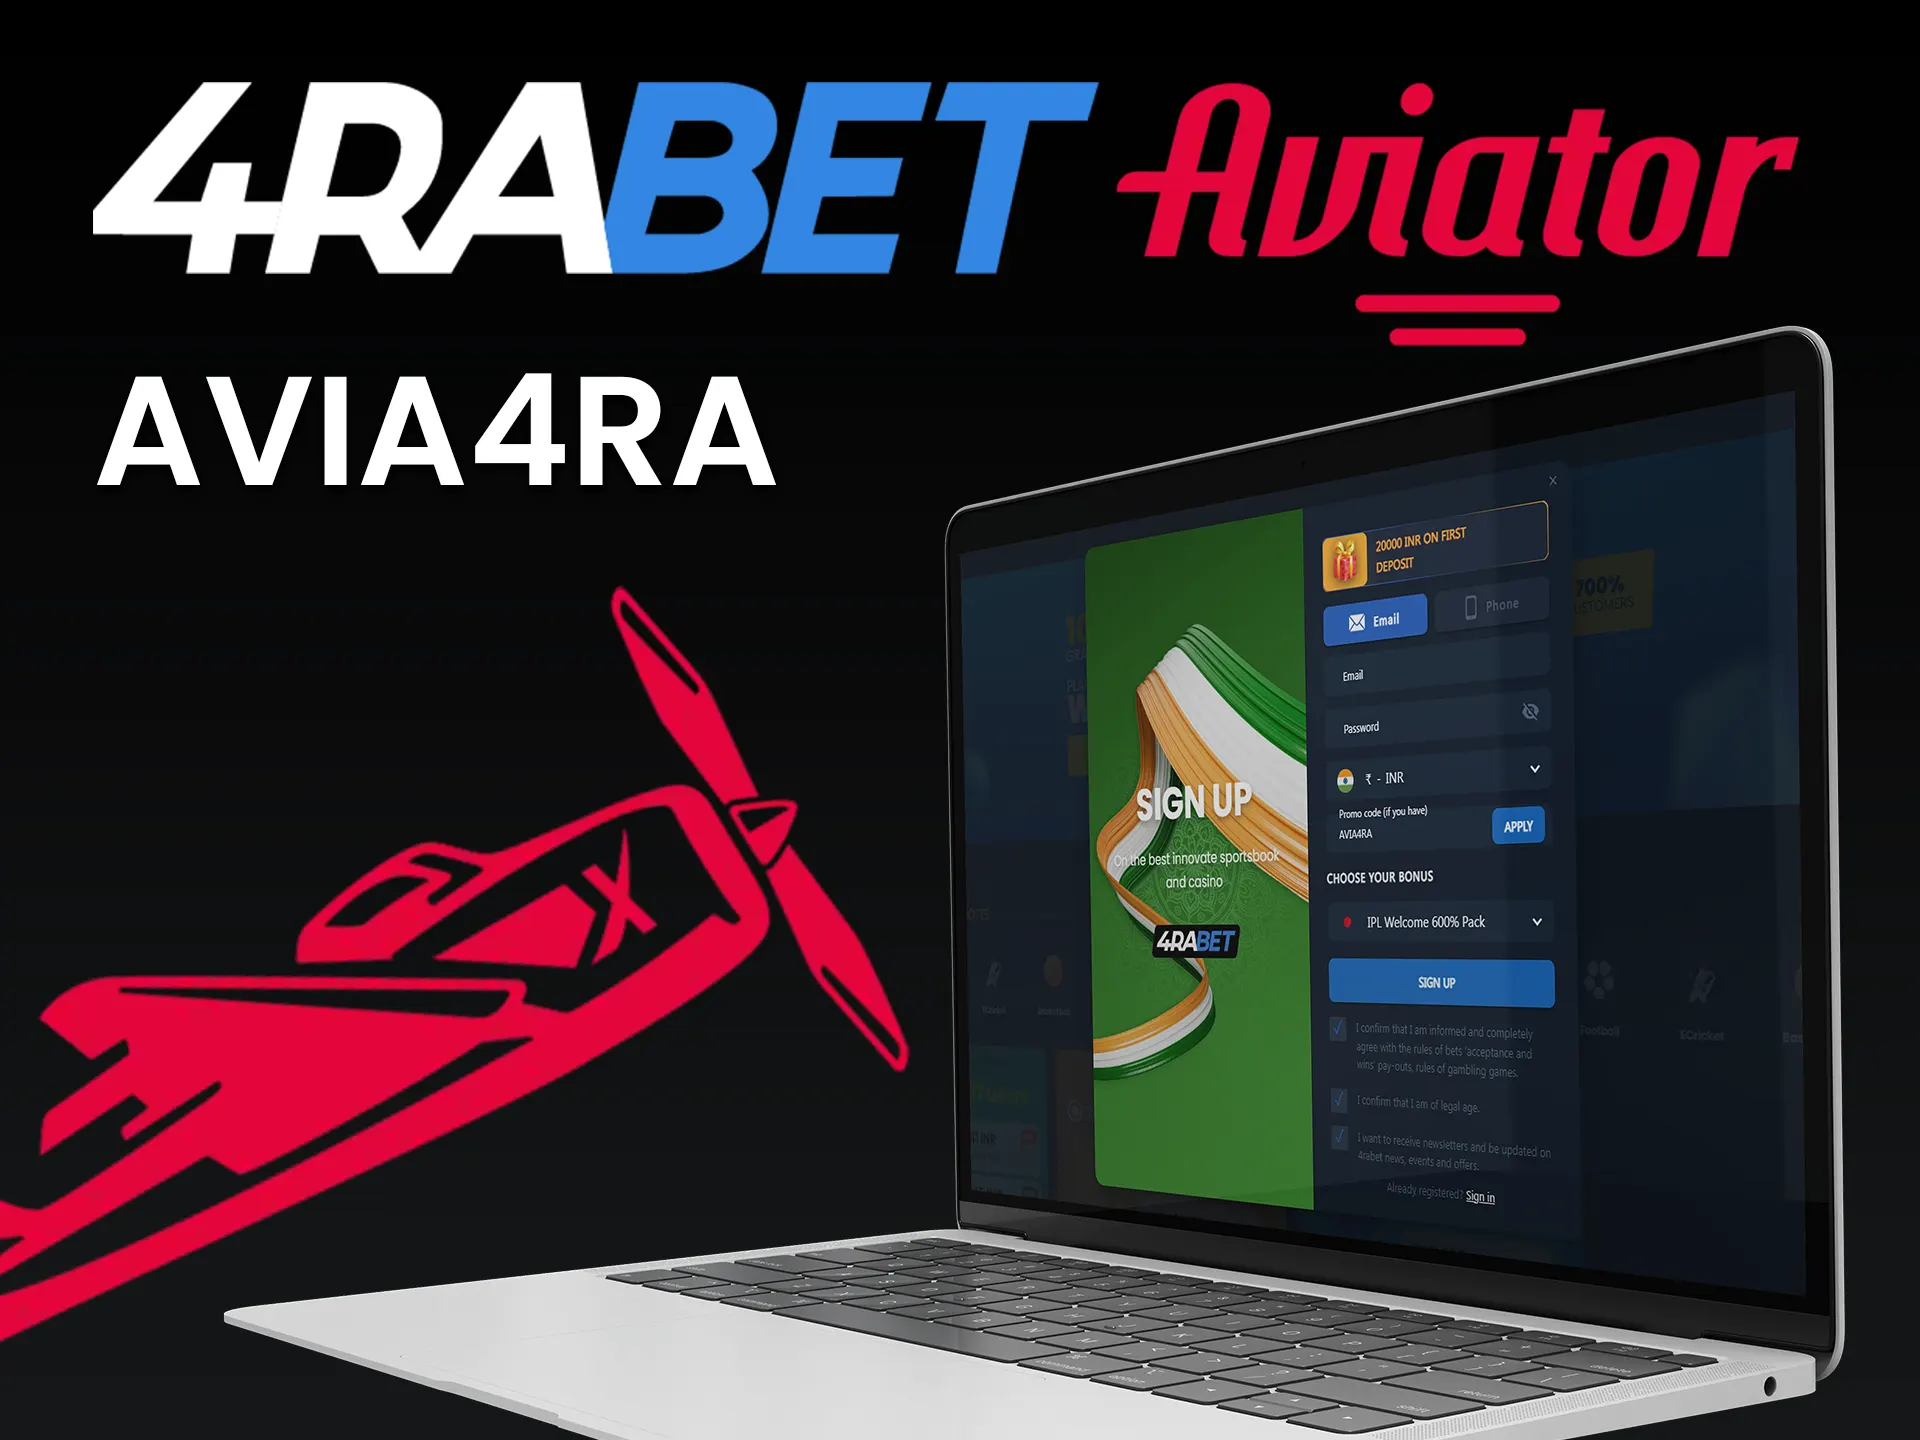 Use the promo code from 4rabet to play Aviator.